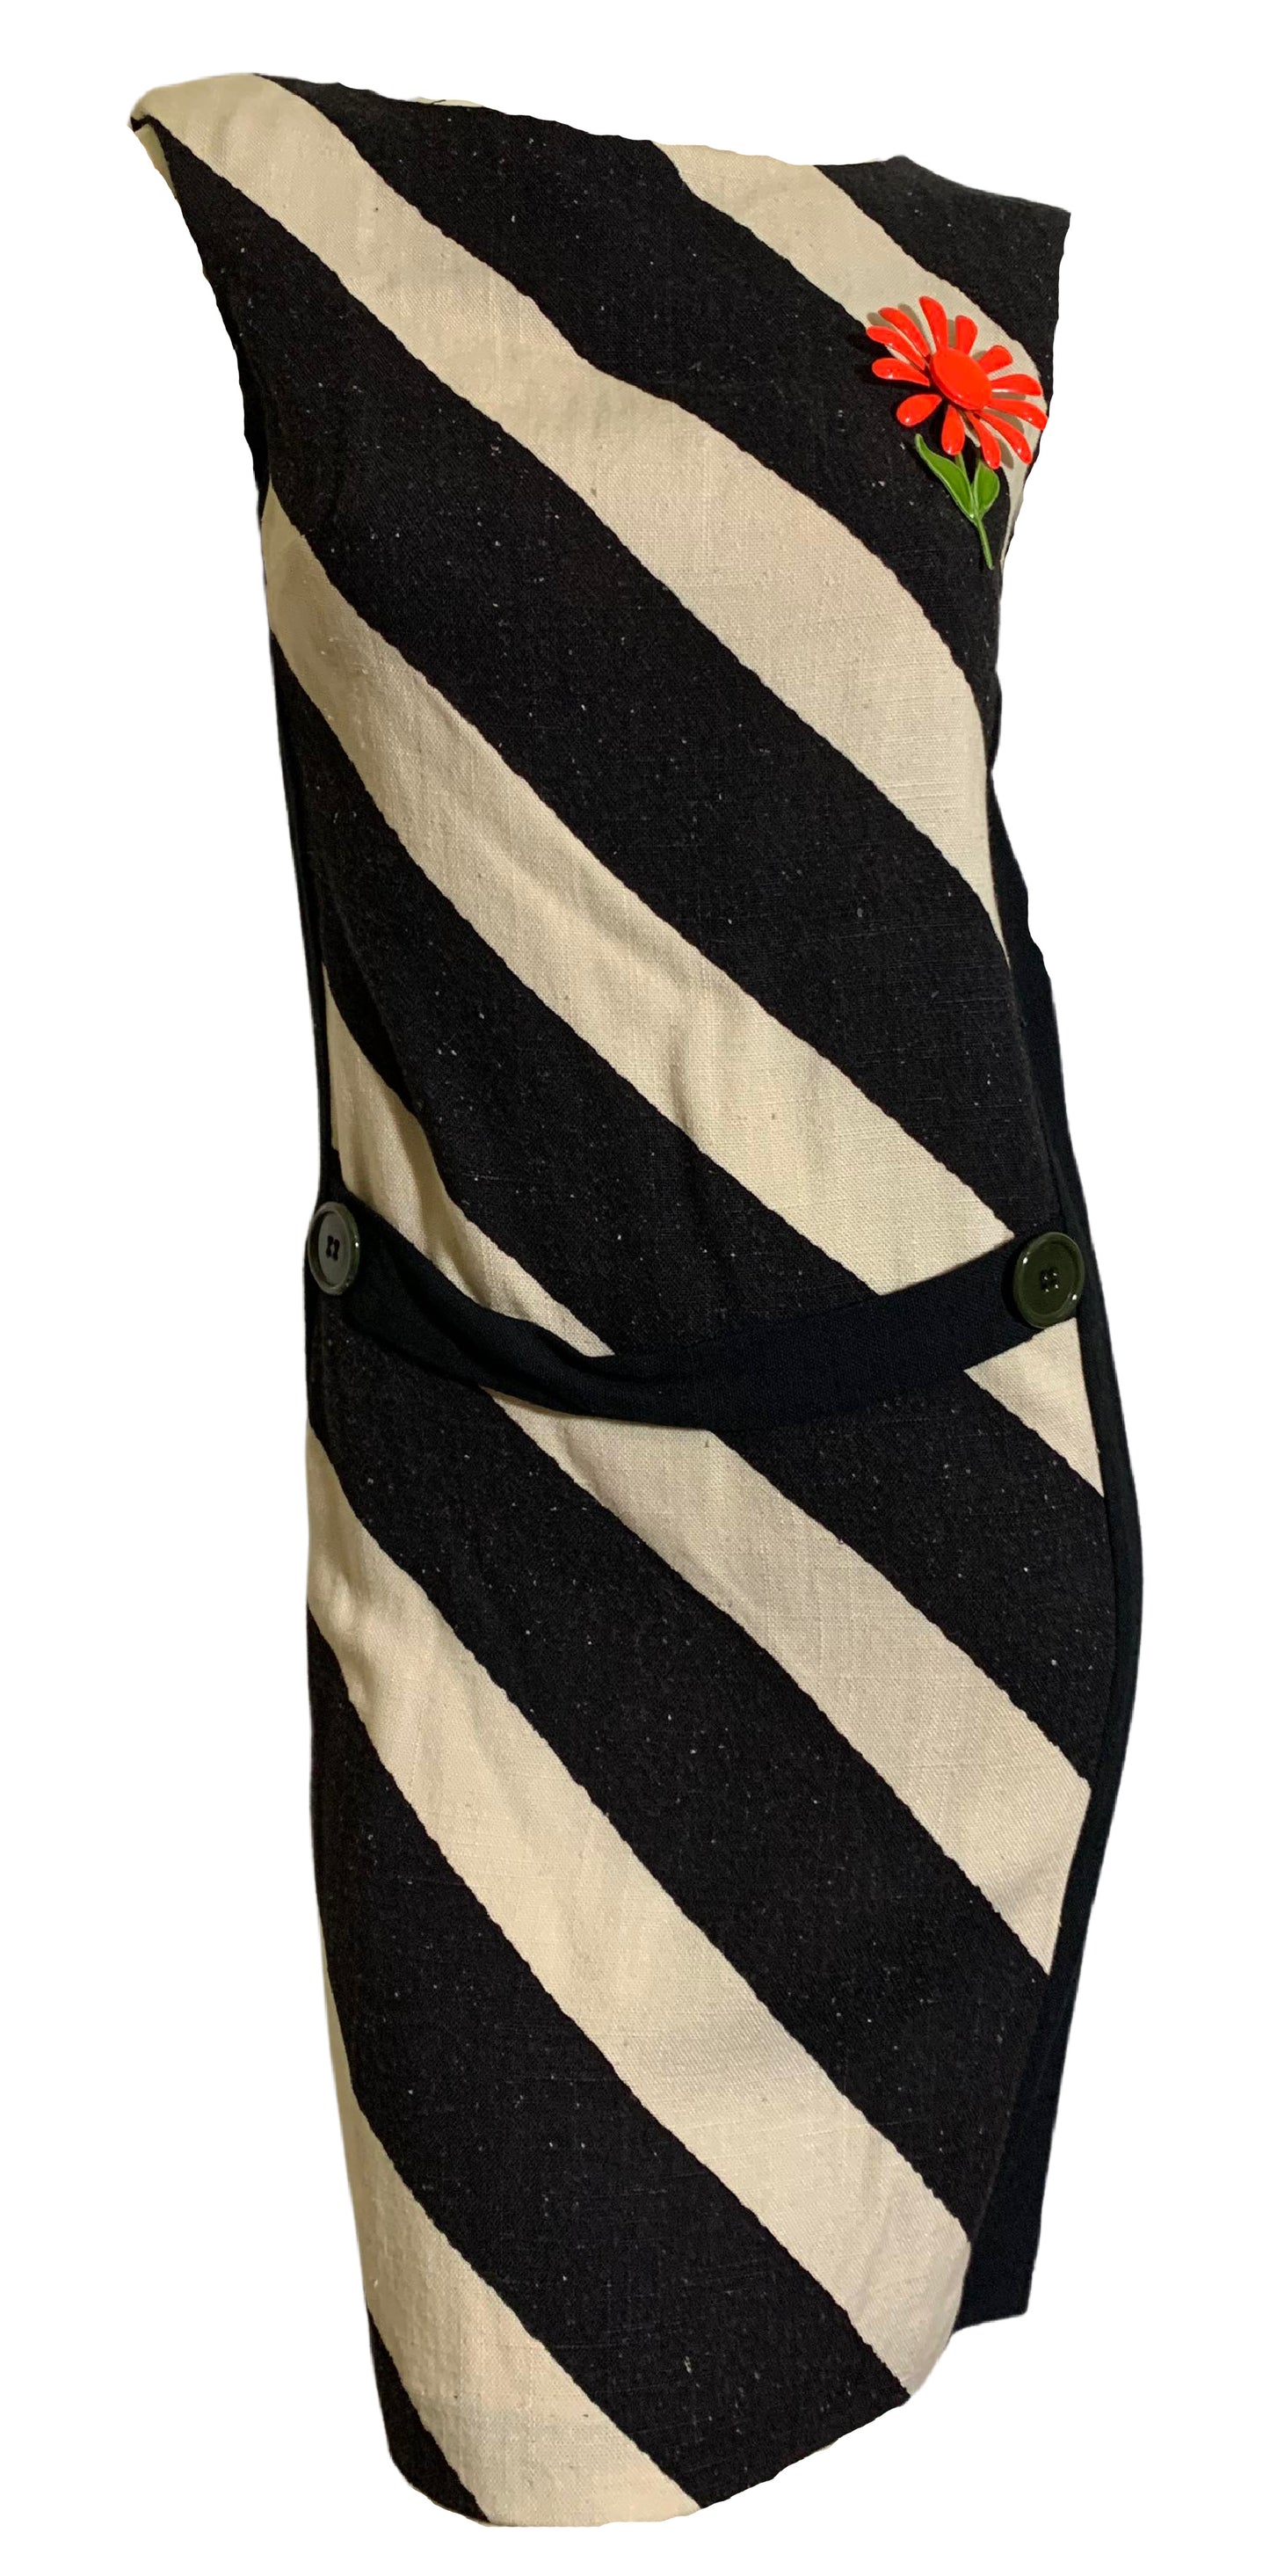 Speckled Black and Off White Striped Shift Dress circa 1960s